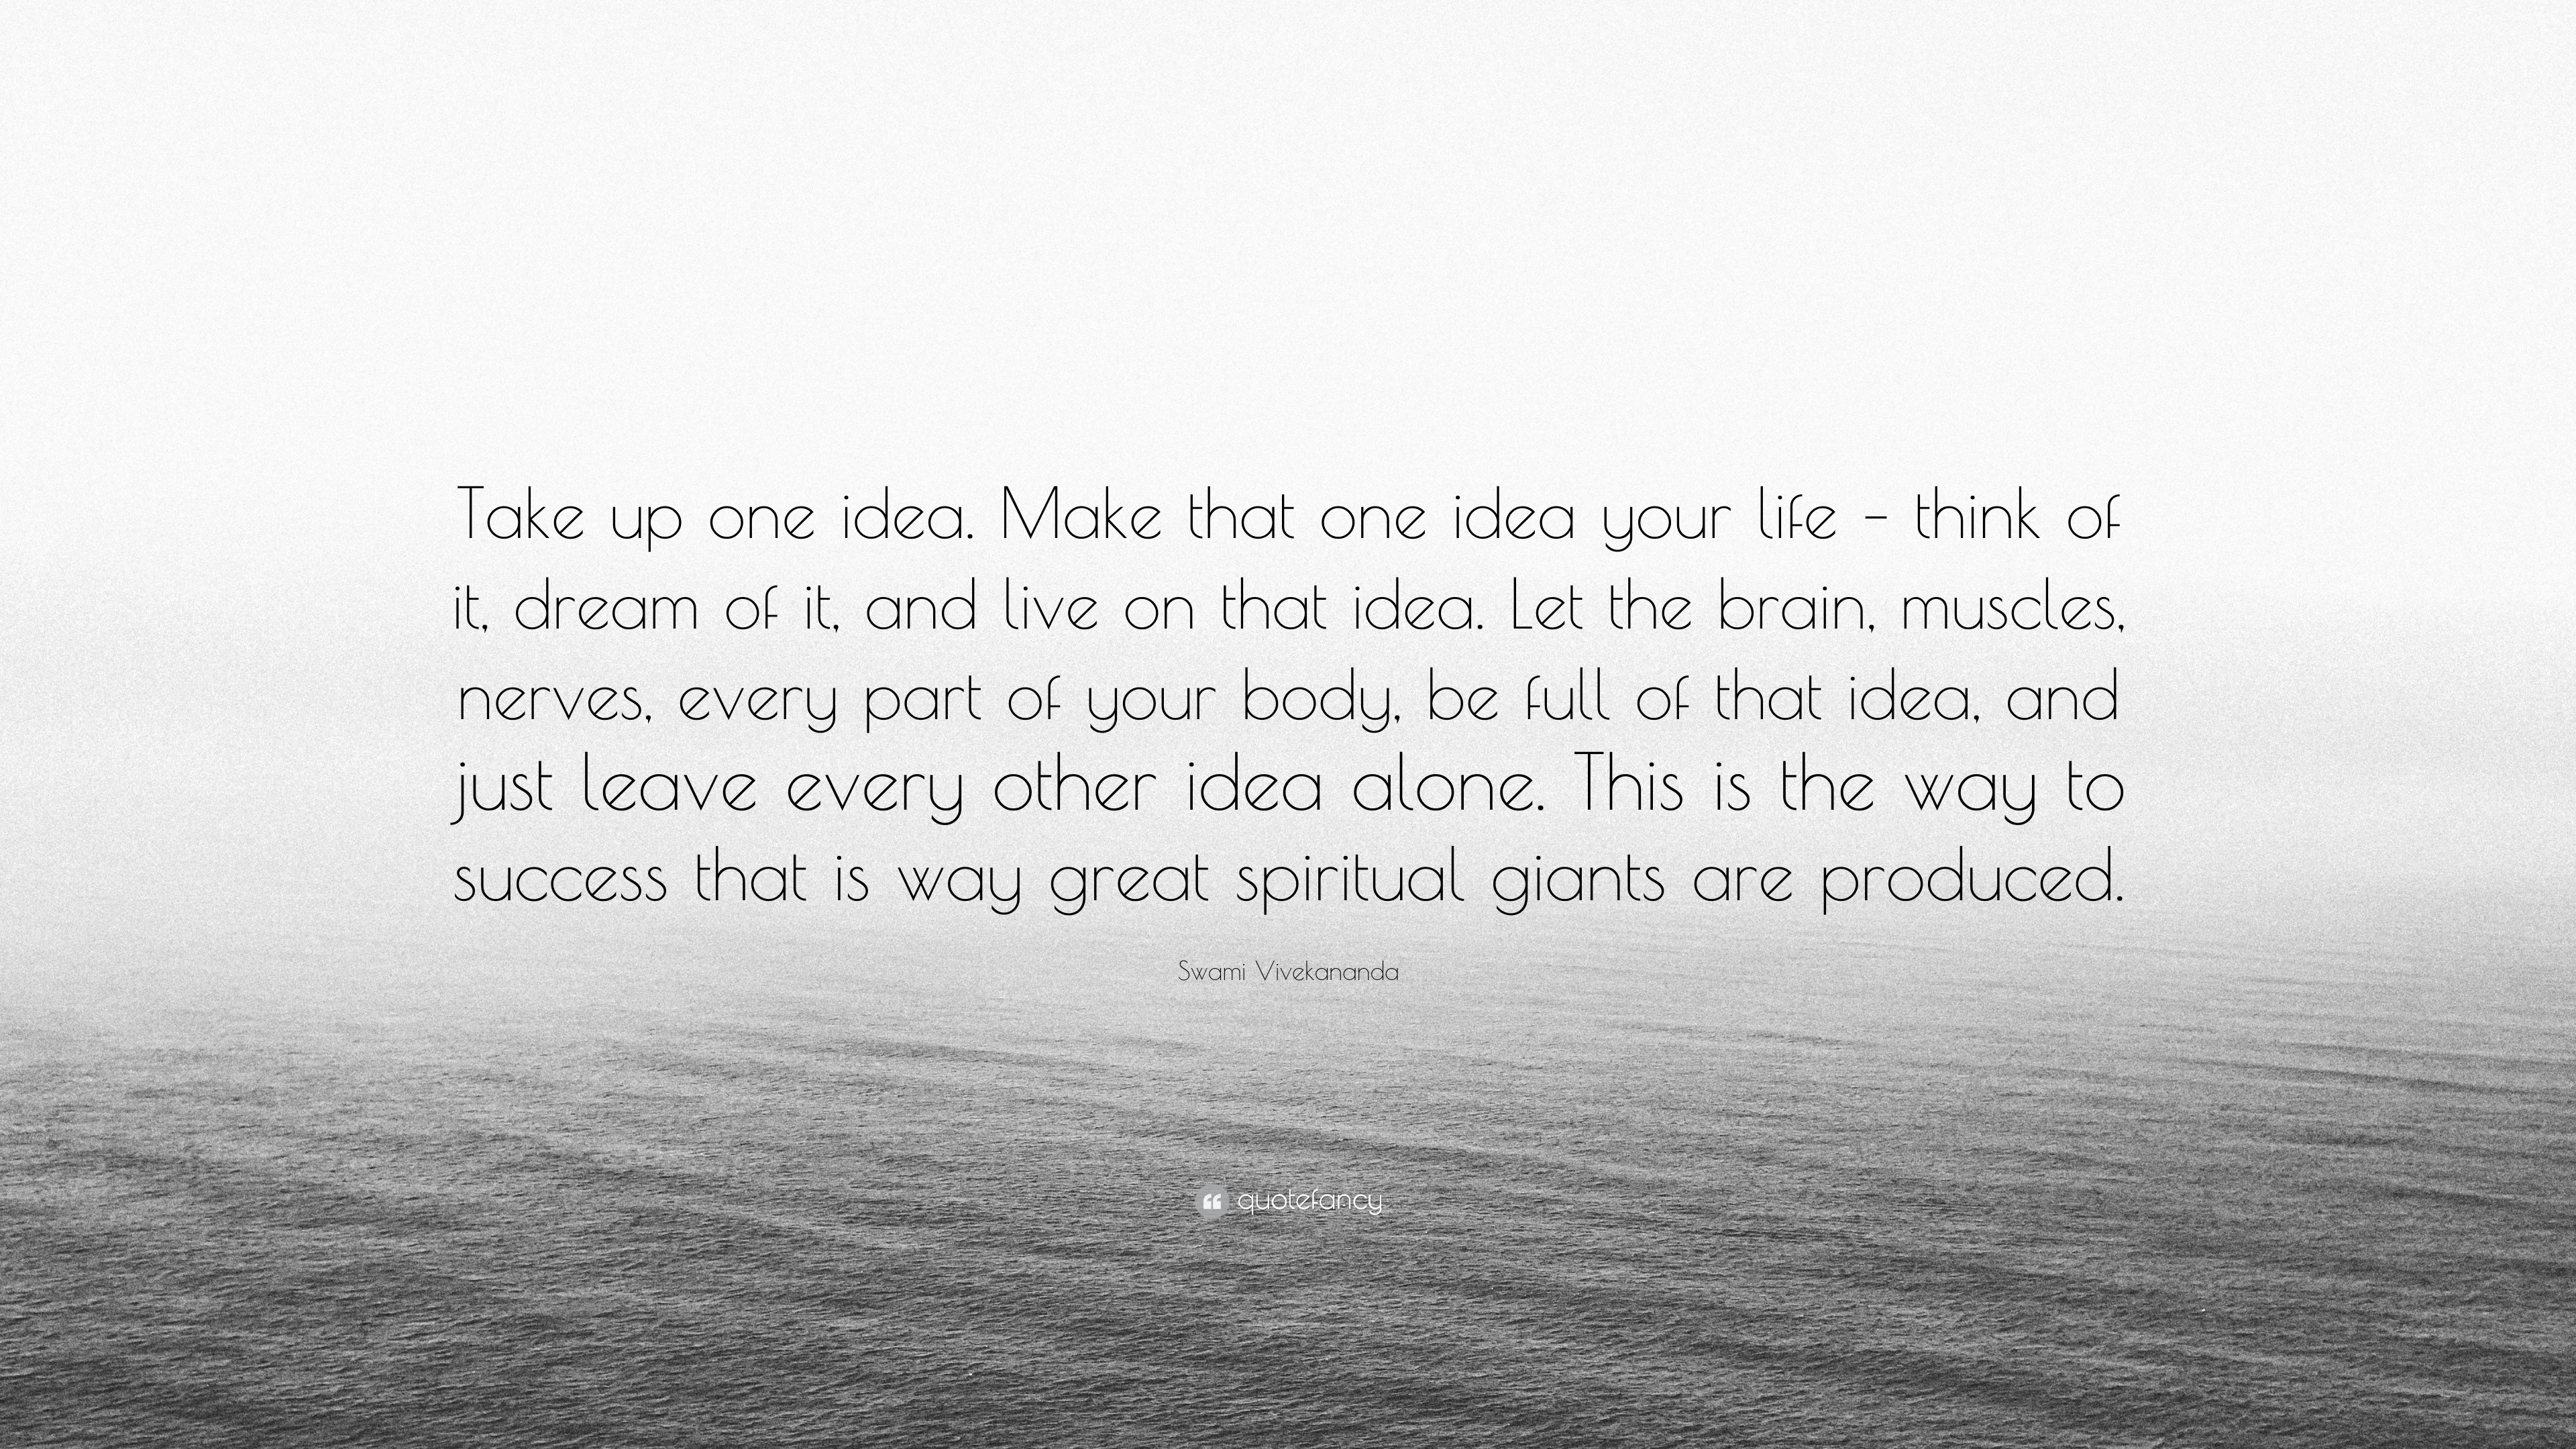 Swami Vivekananda Quote: “Take up one idea. Make that one idea your life –  think of it, dream of it, and live on that idea. Let the brain, muscles...”